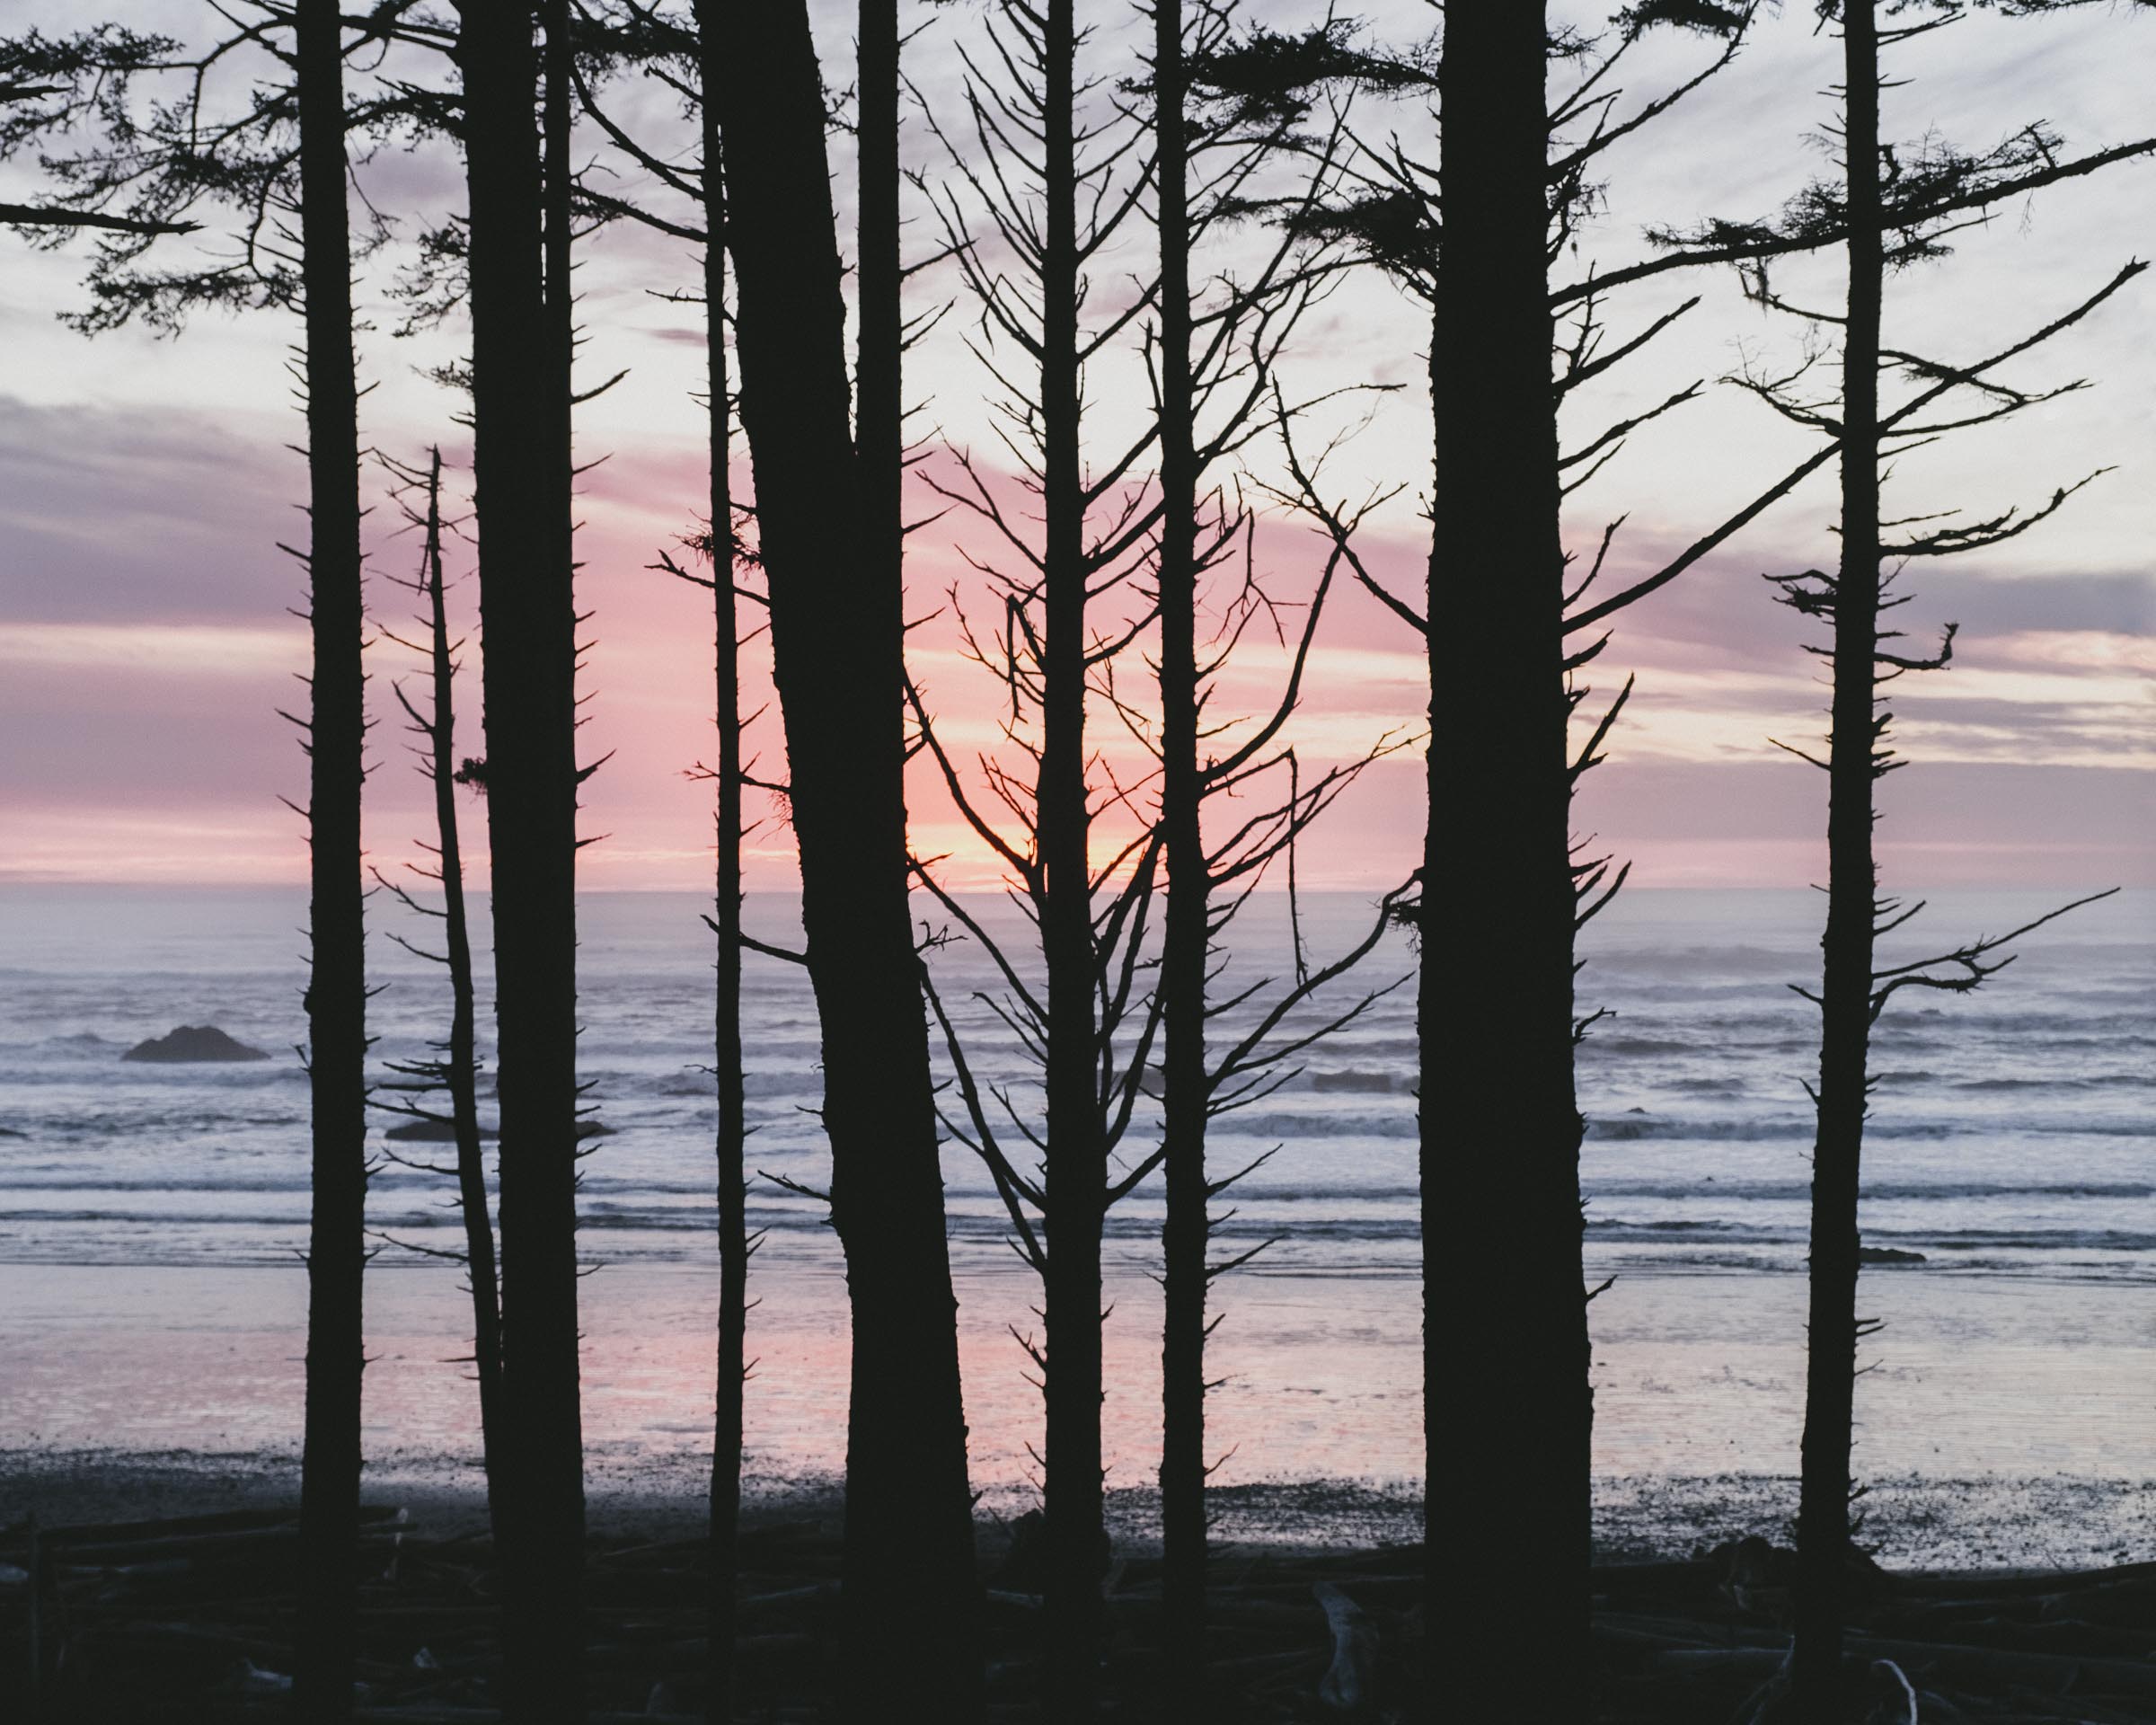 Watching the sunset over the Pacific Ocean through the trees